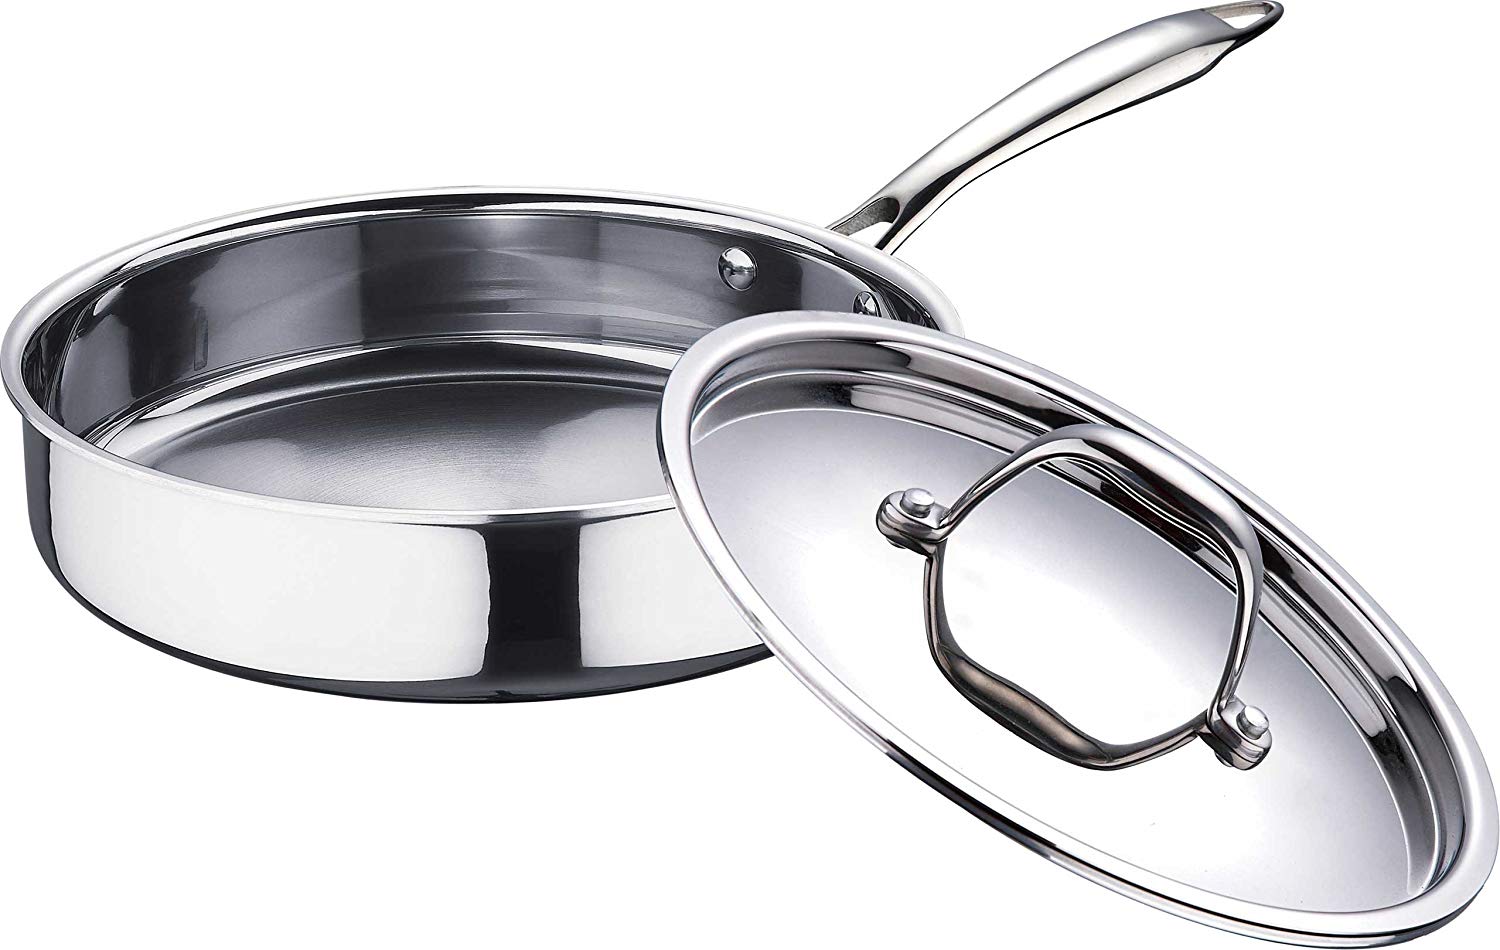 Bergner Argent Stainless Steel Frypan with Lid Review India